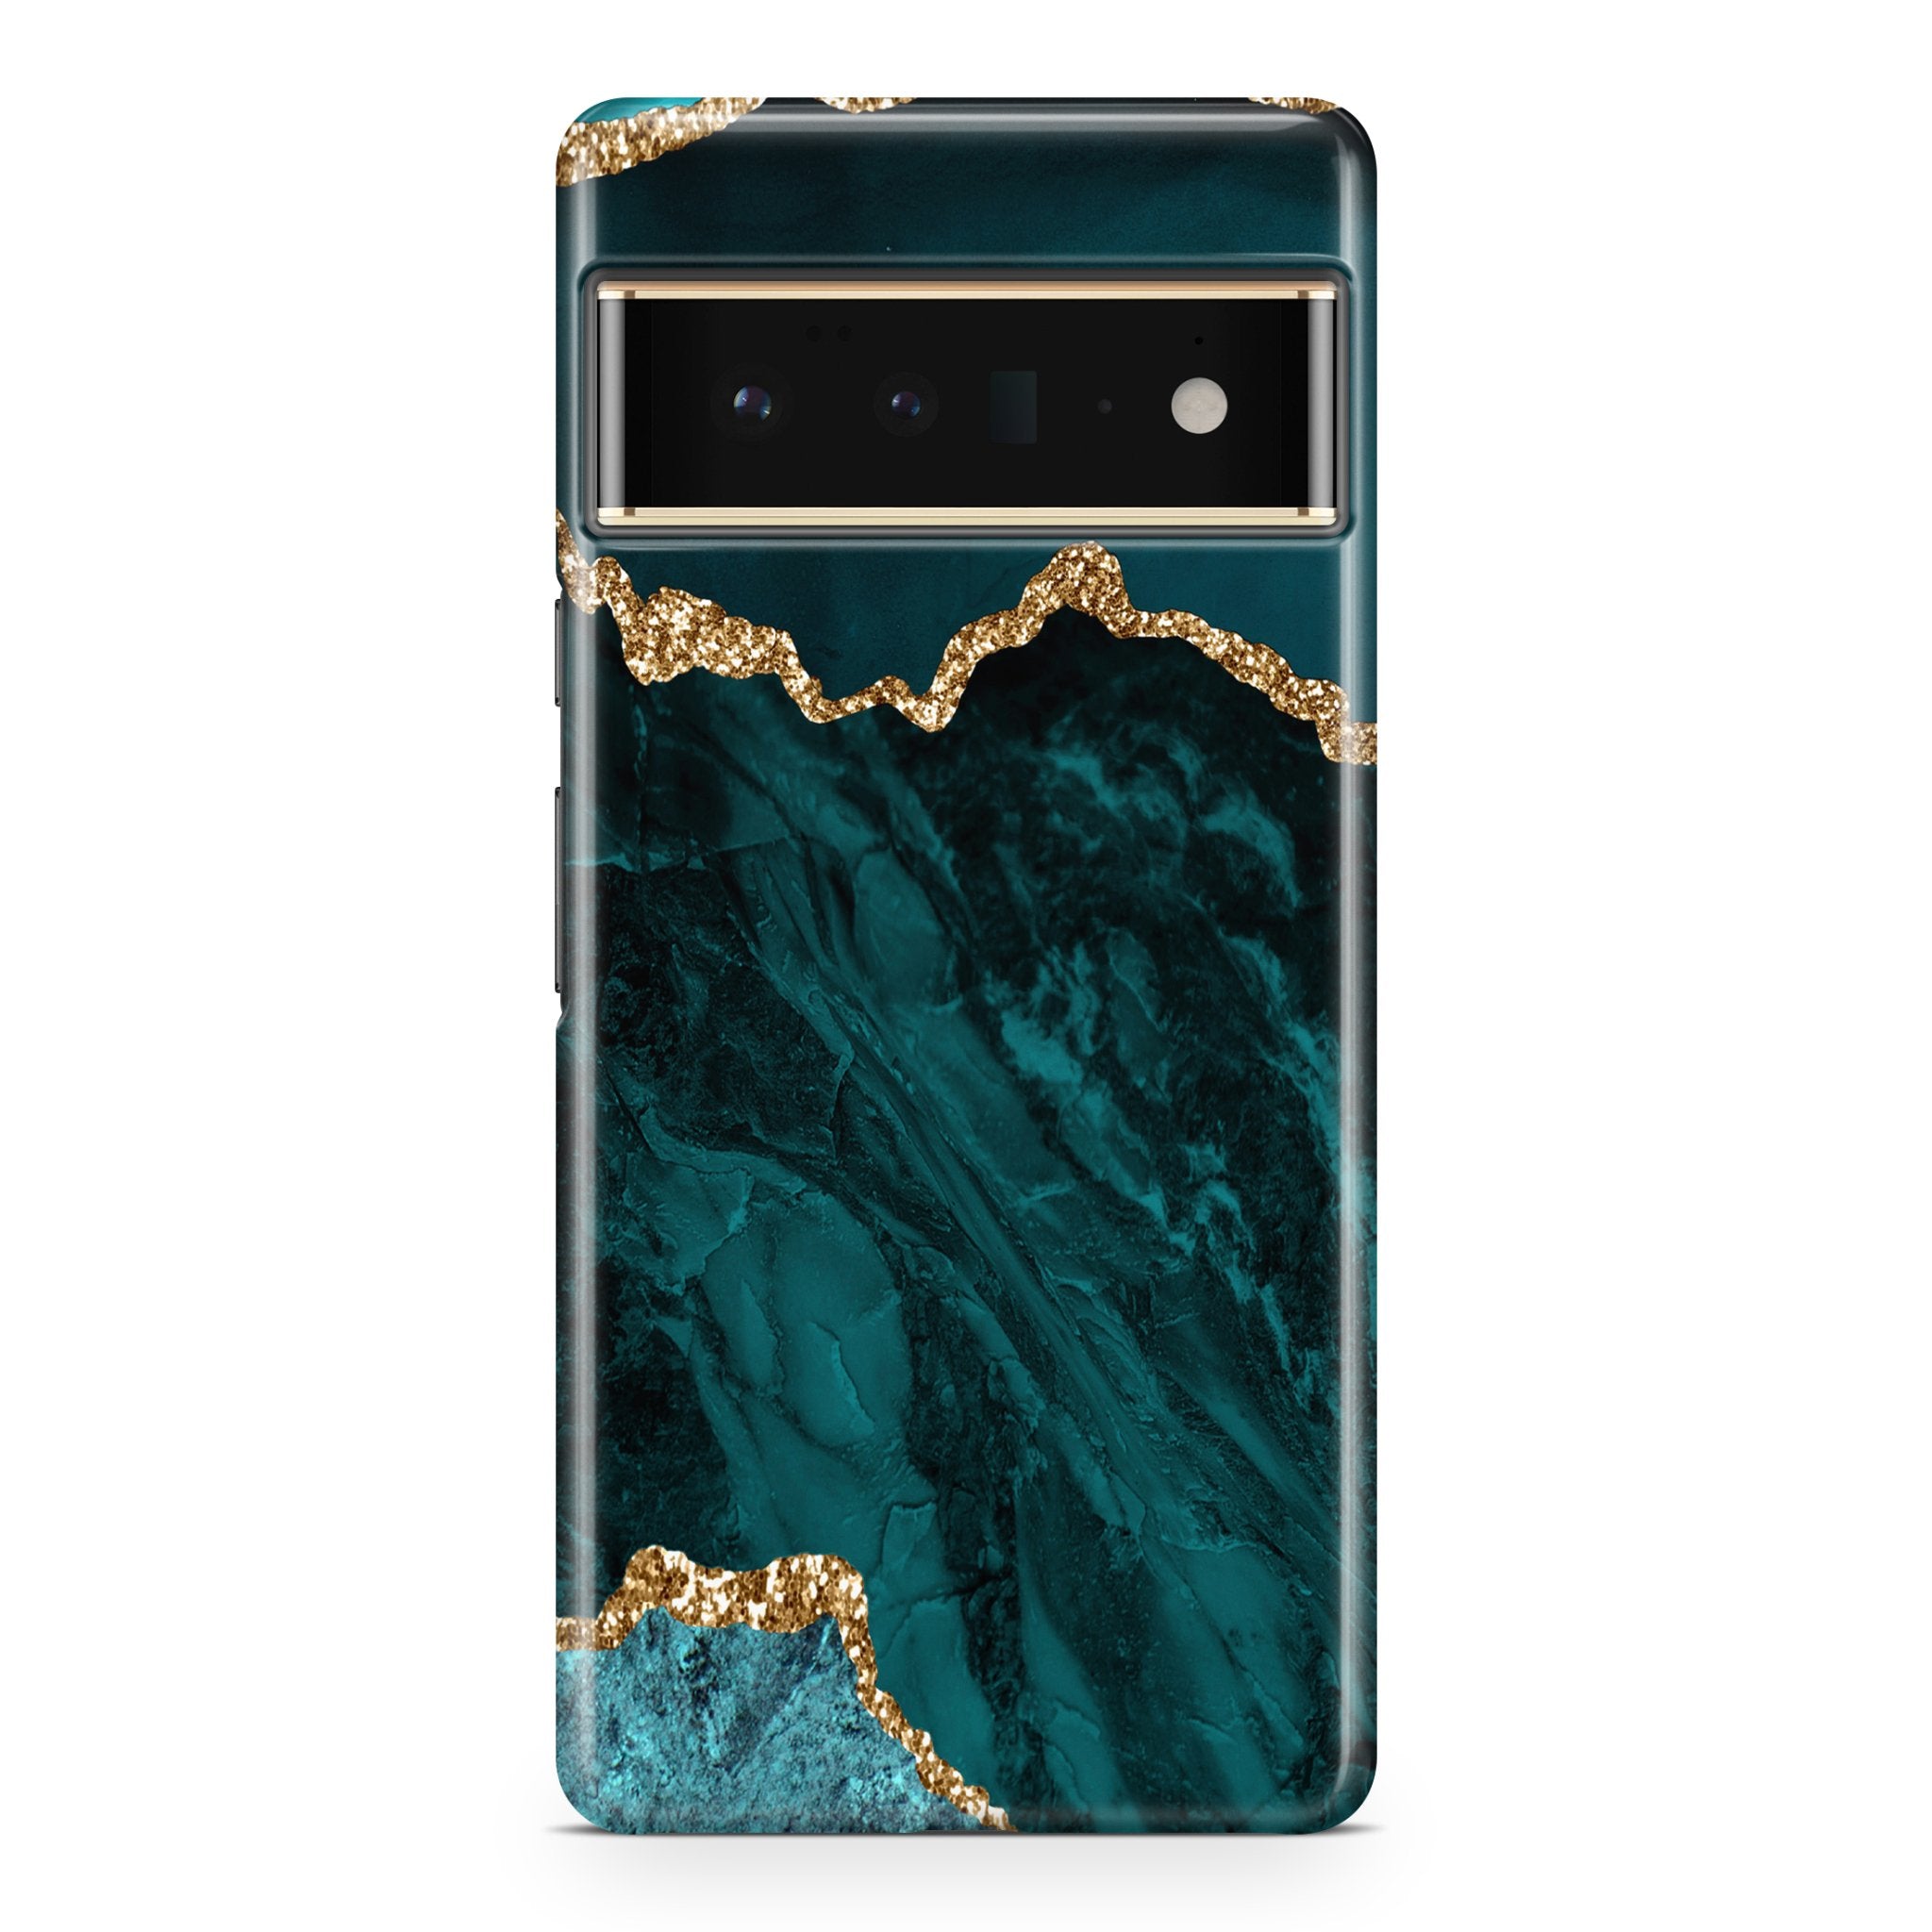 Teal Elegance II - Google phone case designs by CaseSwagger